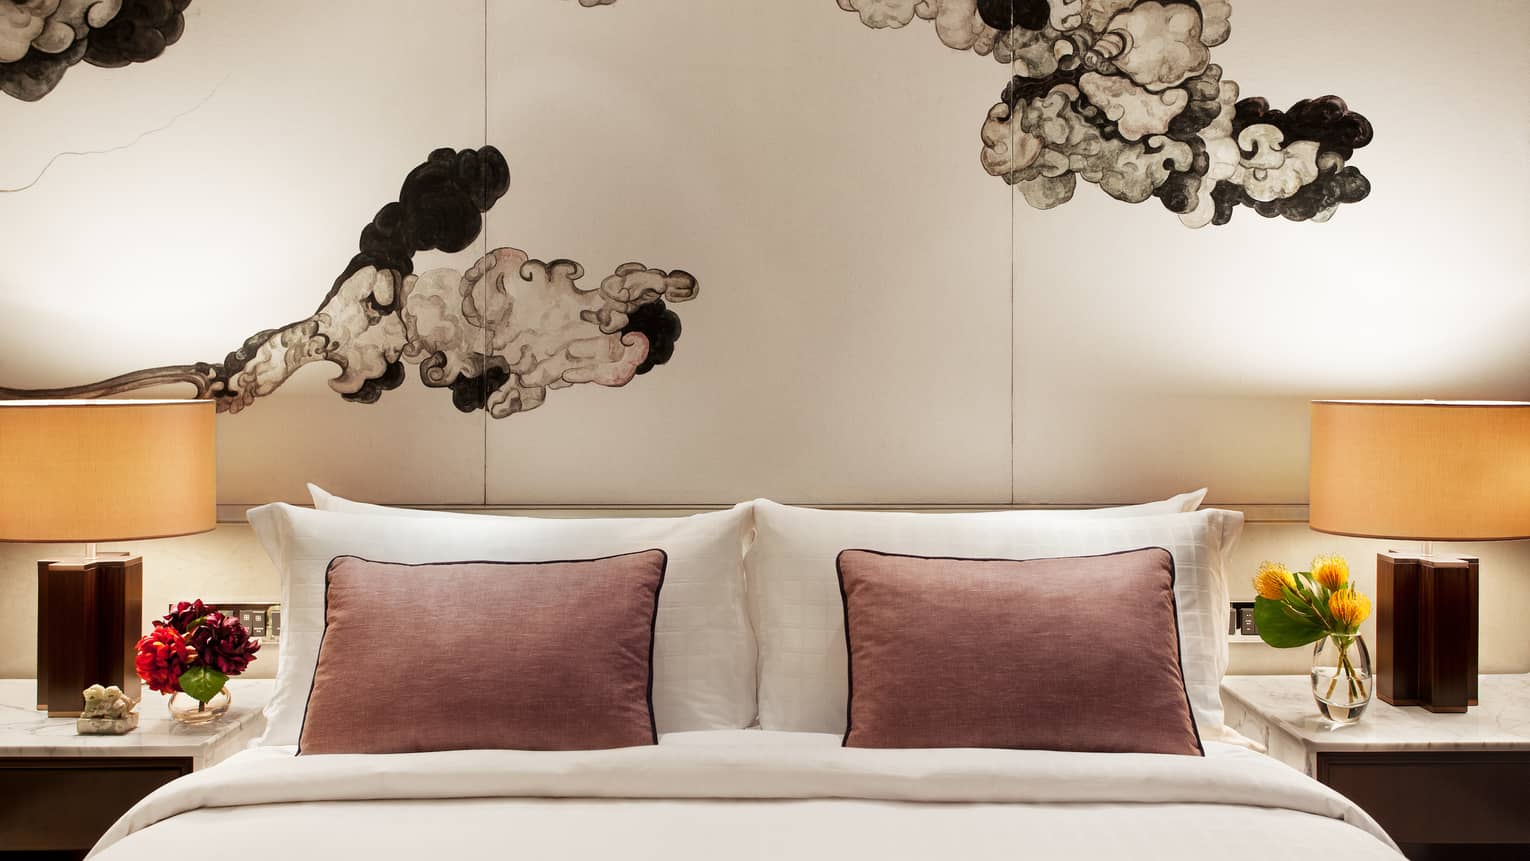 Club Grand Room hotel bed with pink accent pillows under Chinese brushwork mural